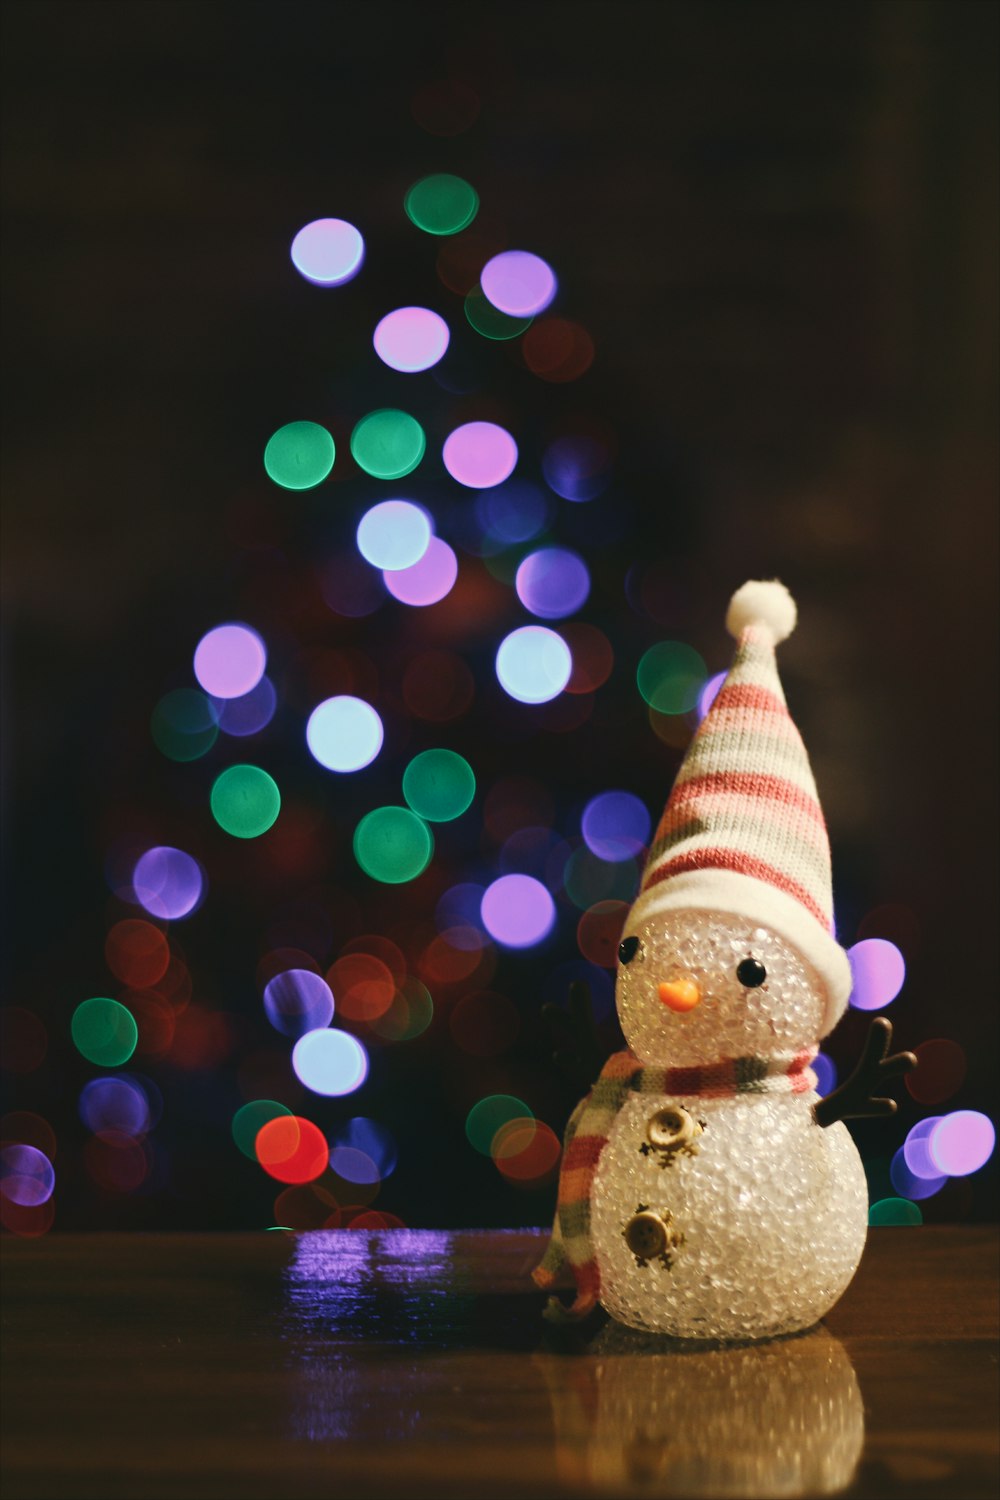 A little snowman figure sitting on the floor in front of a Christmas tree.